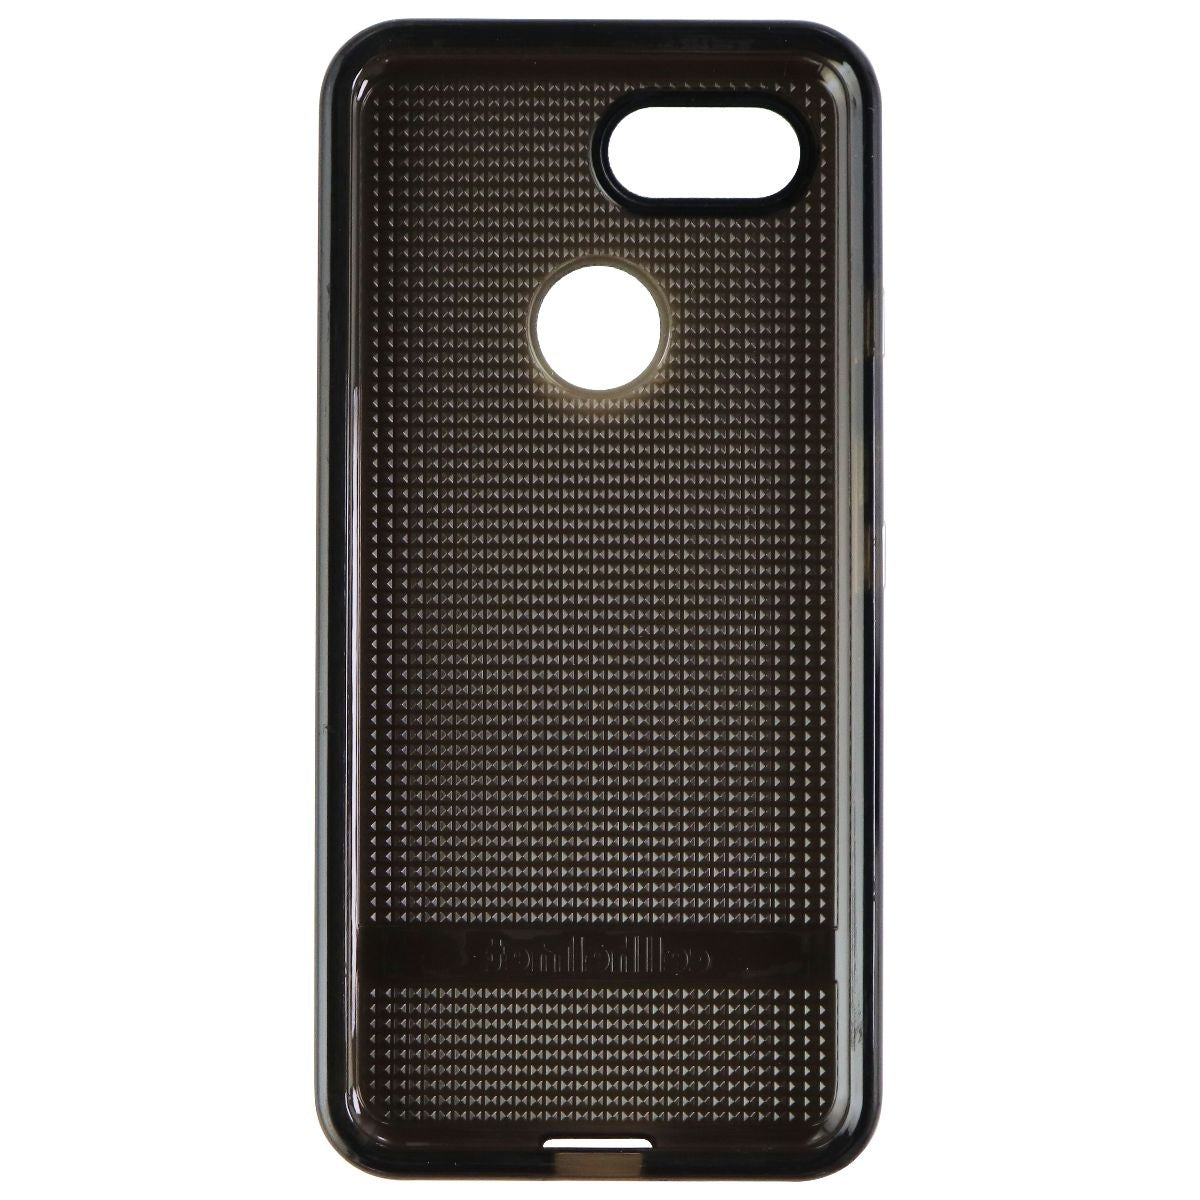 DO NOT USE - Check U13018 Family Cell Phone - Cases, Covers & Skins CellHelmet    - Simple Cell Bulk Wholesale Pricing - USA Seller